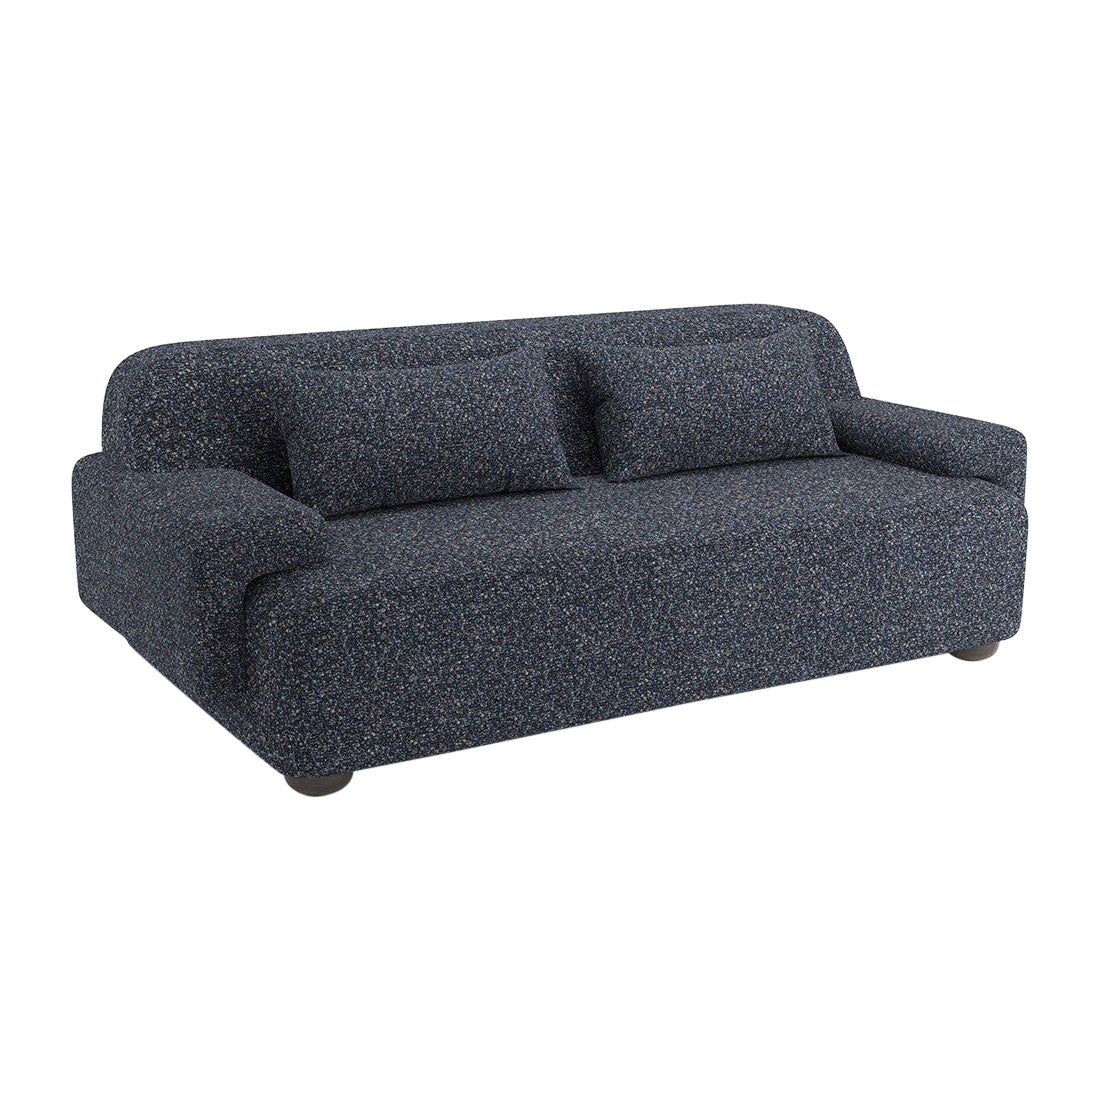 Popus Editions Lena 2.5 Seater Sofa in Thunderstorm Zanzi Linen & Wool Blend For Sale